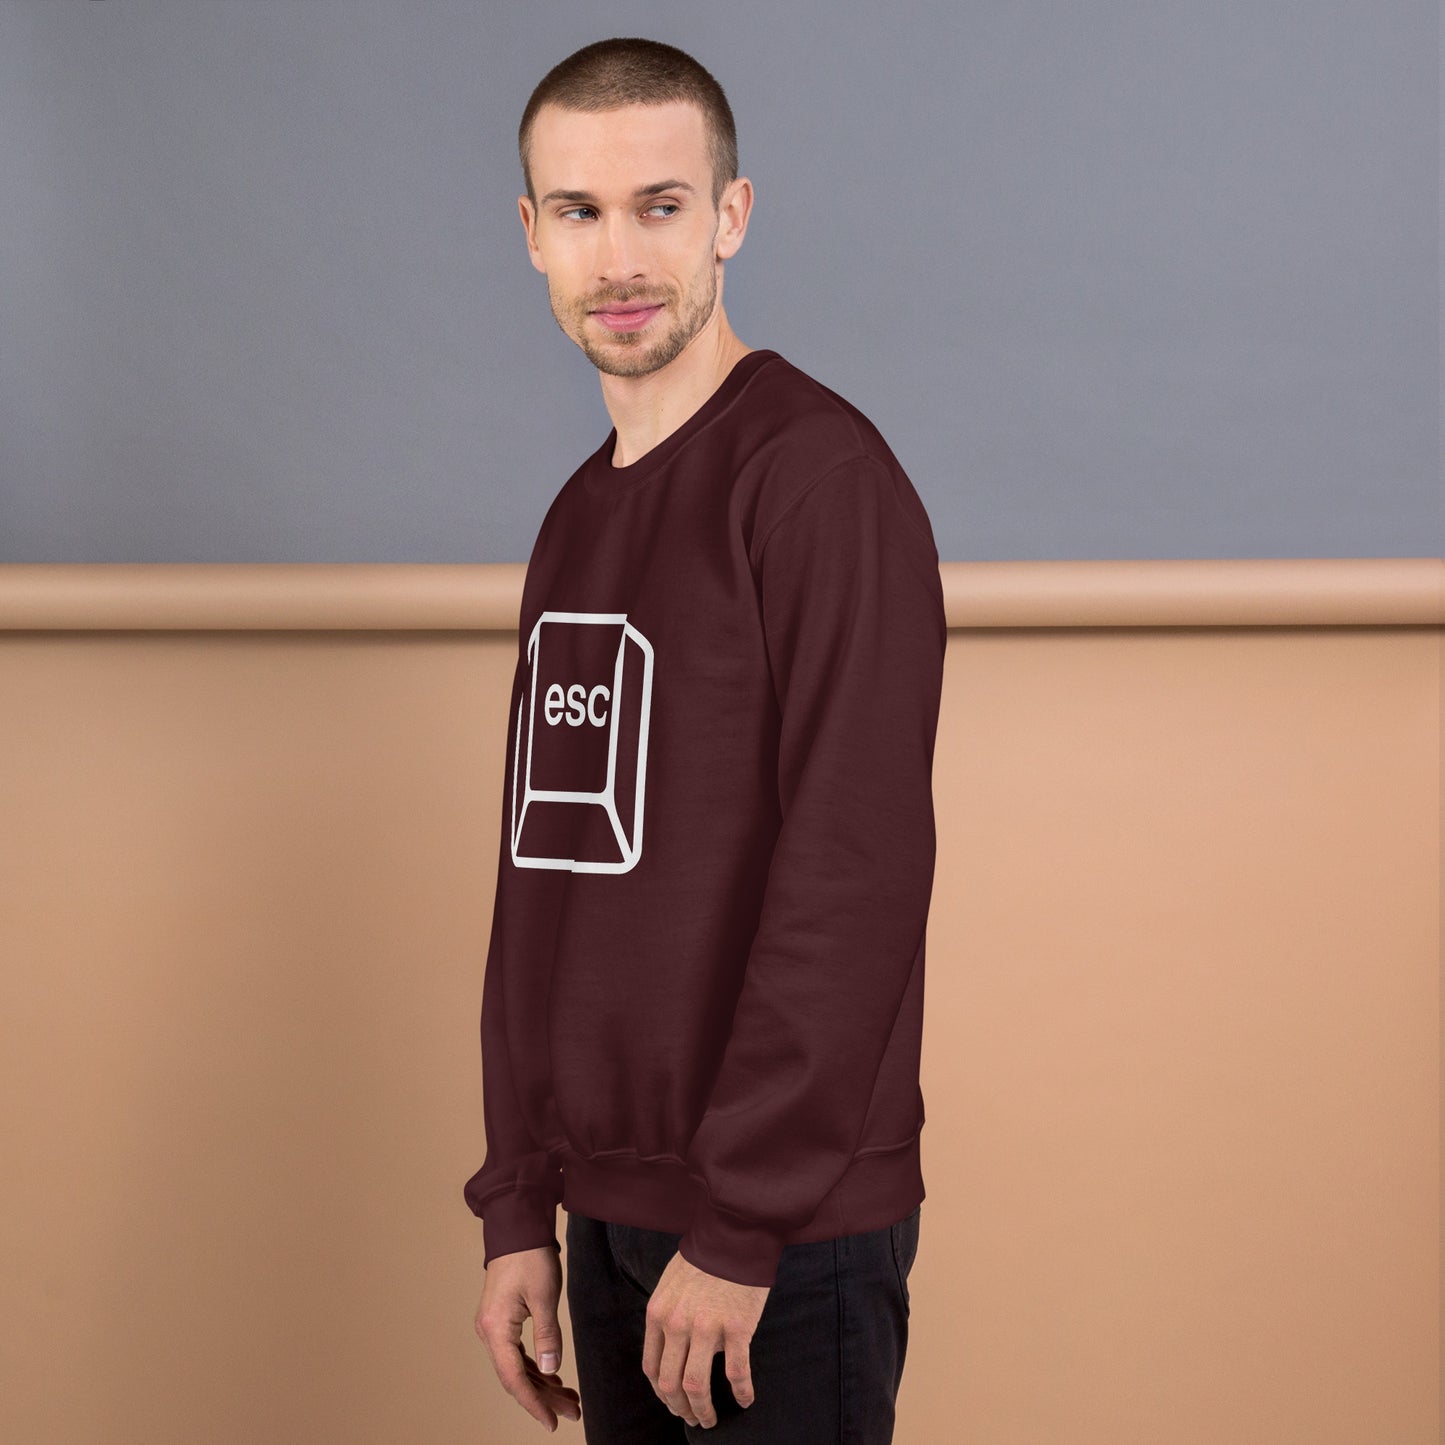 Man with maroon sweatshirt with picture of esc key